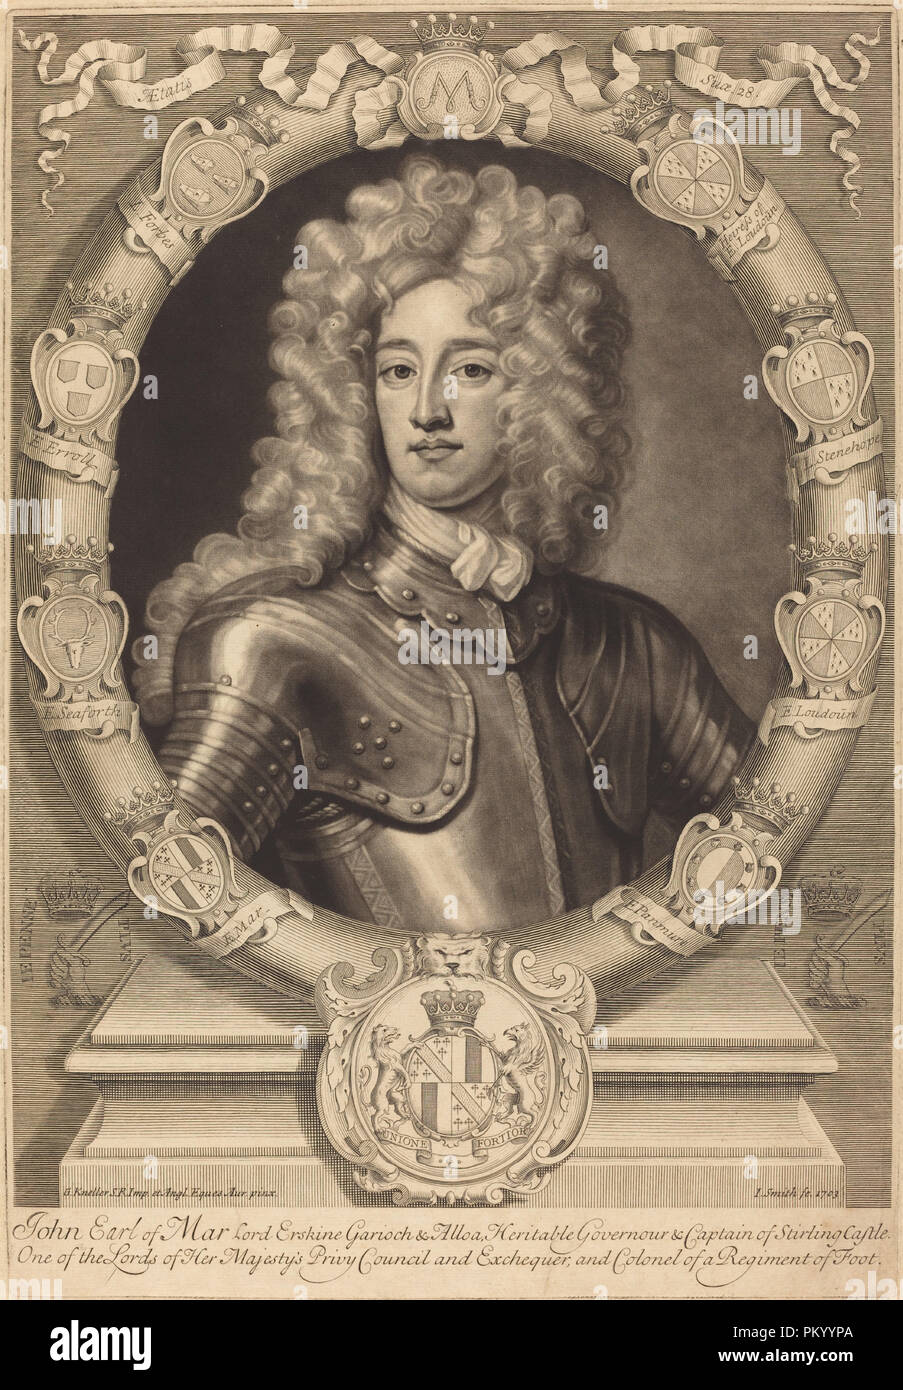 John, Earl of Mar, Lord Erskine. Dated: 1703. Dimensions: plate: 44.9 x 30.9 cm (17 11/16 x 12 3/16 in.)  sheet: 49.9 x 33.2 cm (19 5/8 x 13 1/16 in.). Medium: mezzotint with engraving on laid paper. Museum: National Gallery of Art, Washington DC. Author: John Smith after Sir Godfrey Kneller. Stock Photo